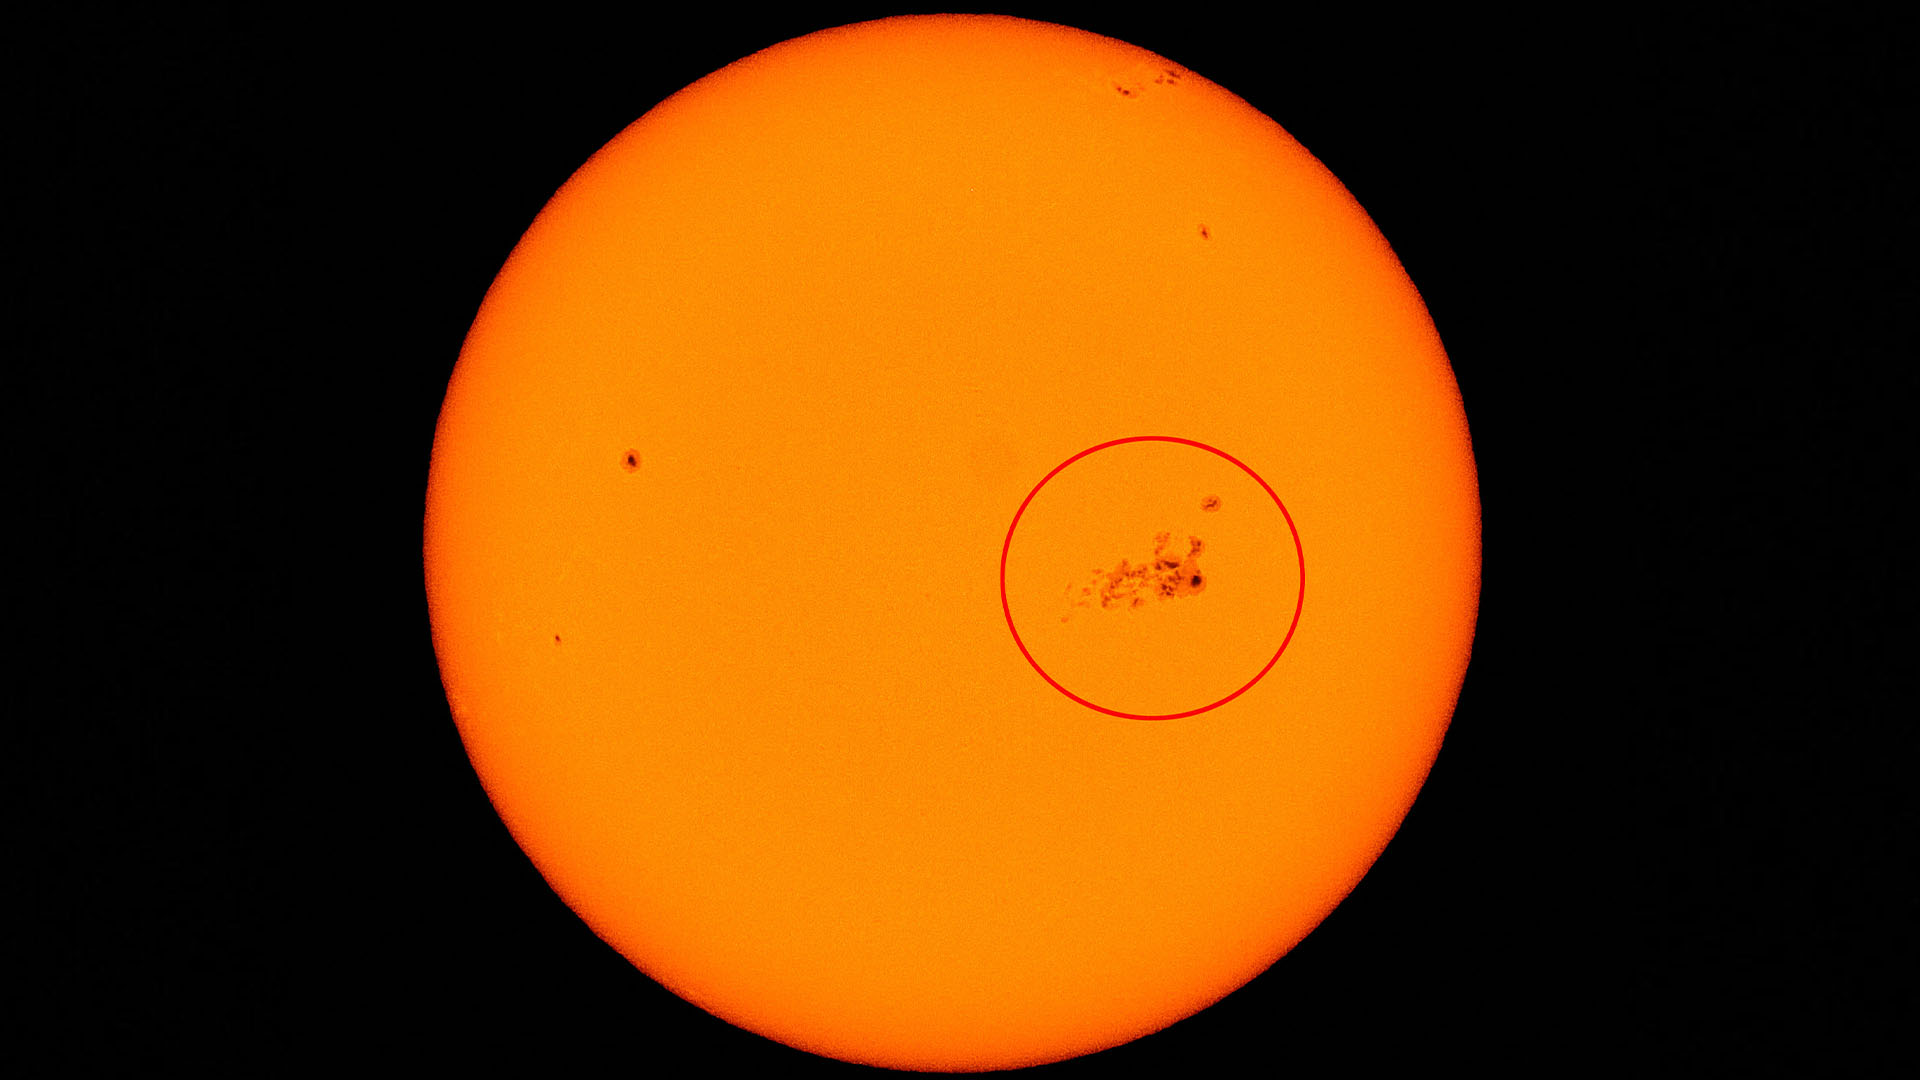 Stunning images of massive sunspots causing global radio blackouts!